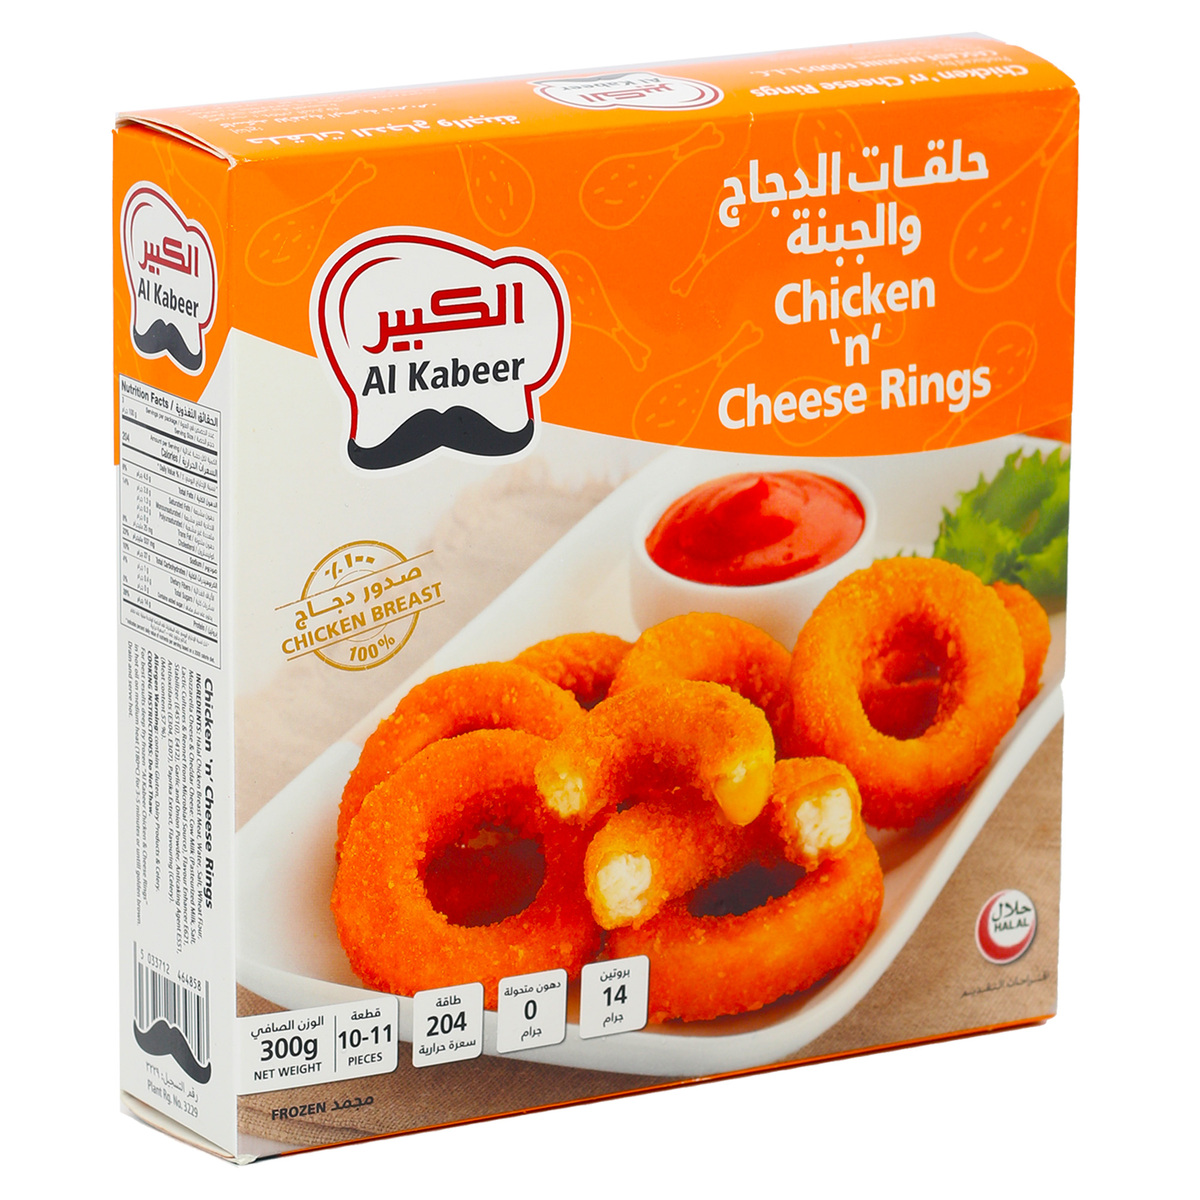 Al Kabeer Chicken & Cheese Rings Value Pack 2 x 300 g